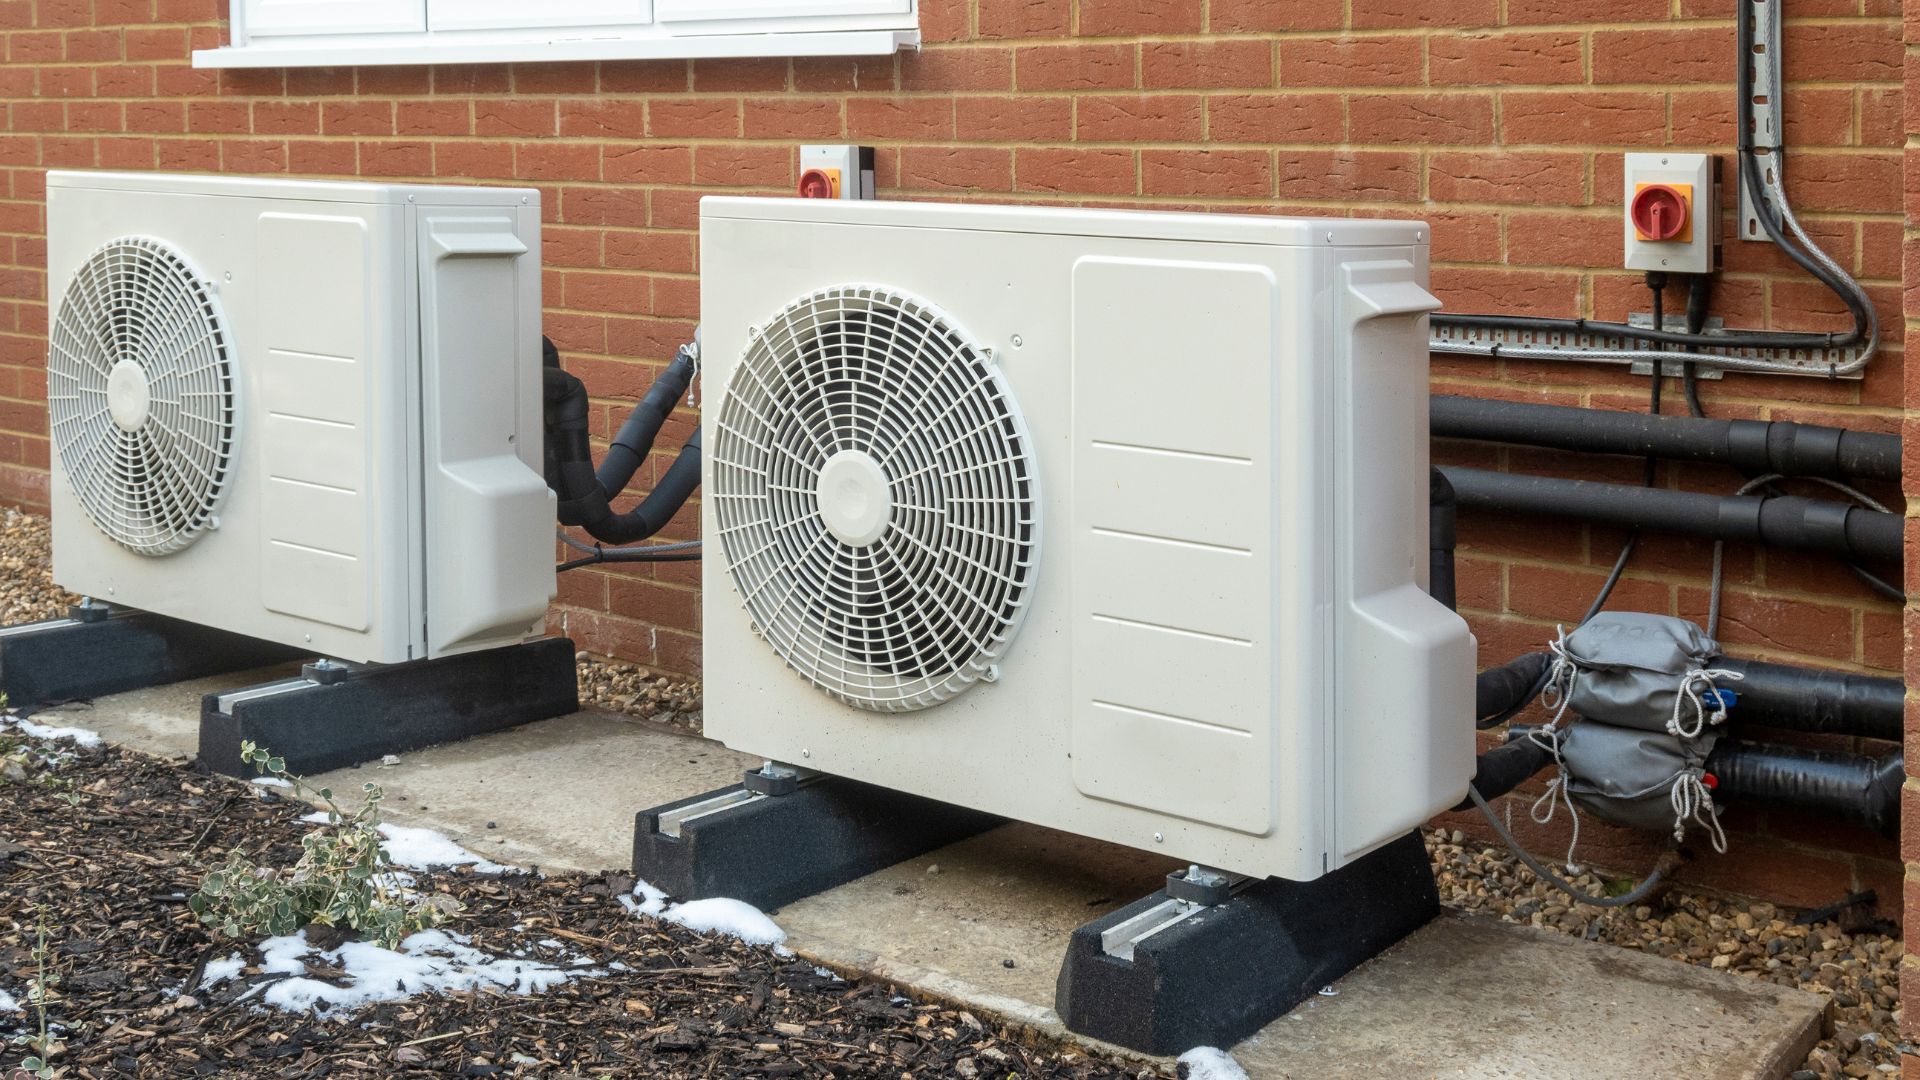 Should I replace my furnace with a heat pump? Cornel's Plumbing, Heating & Air Conditioning can share the benefits and factors to consider.